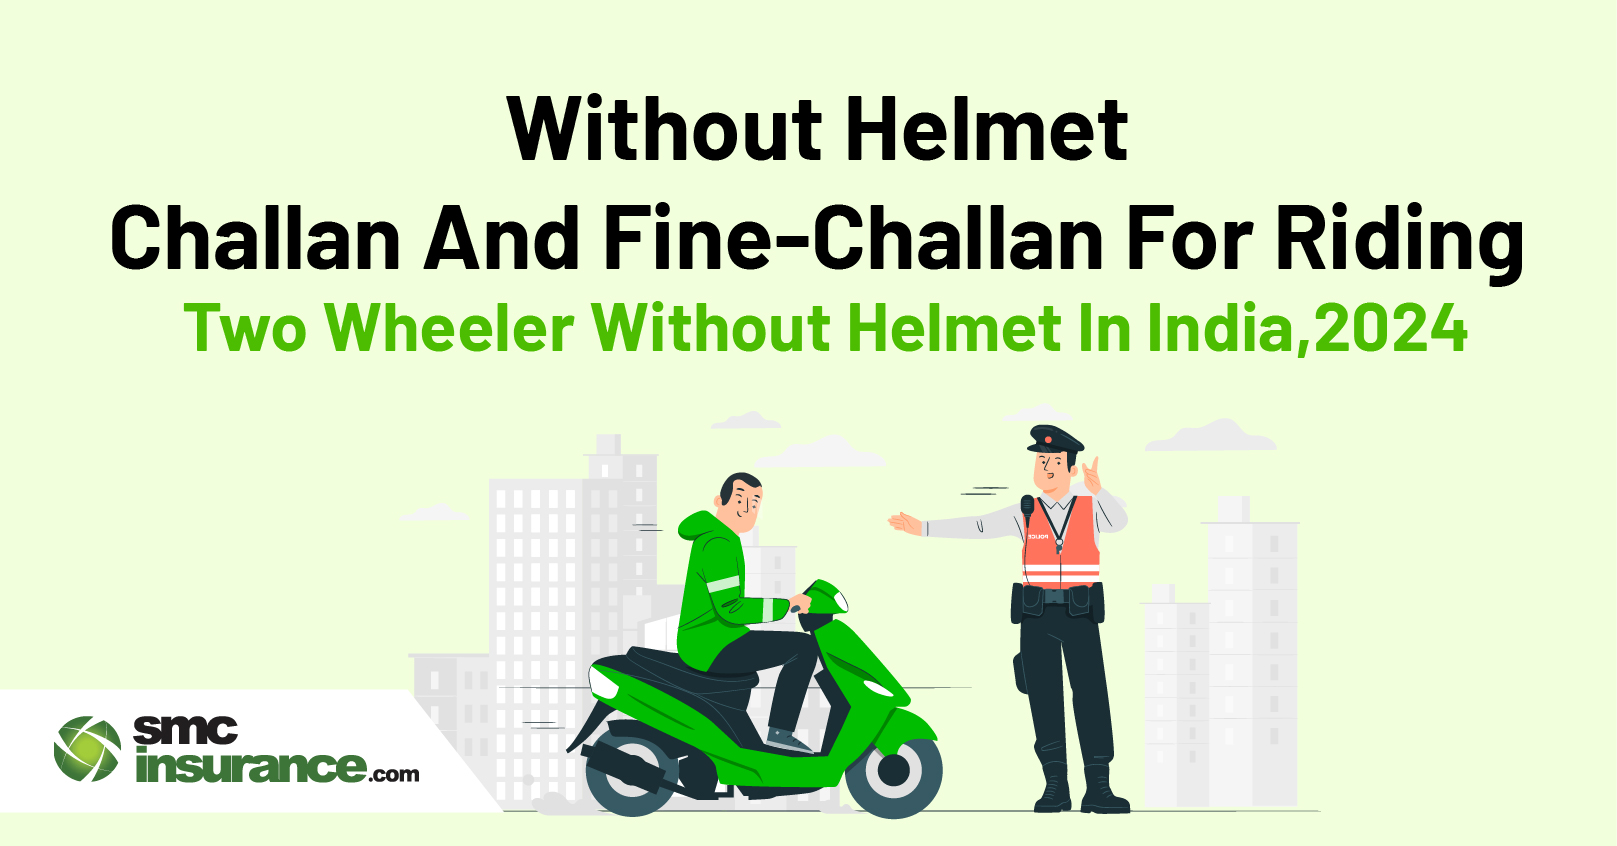 Without Helmet Challan And Fine – Challan For Riding Two-Wheeler Without Helmet In India, 2024